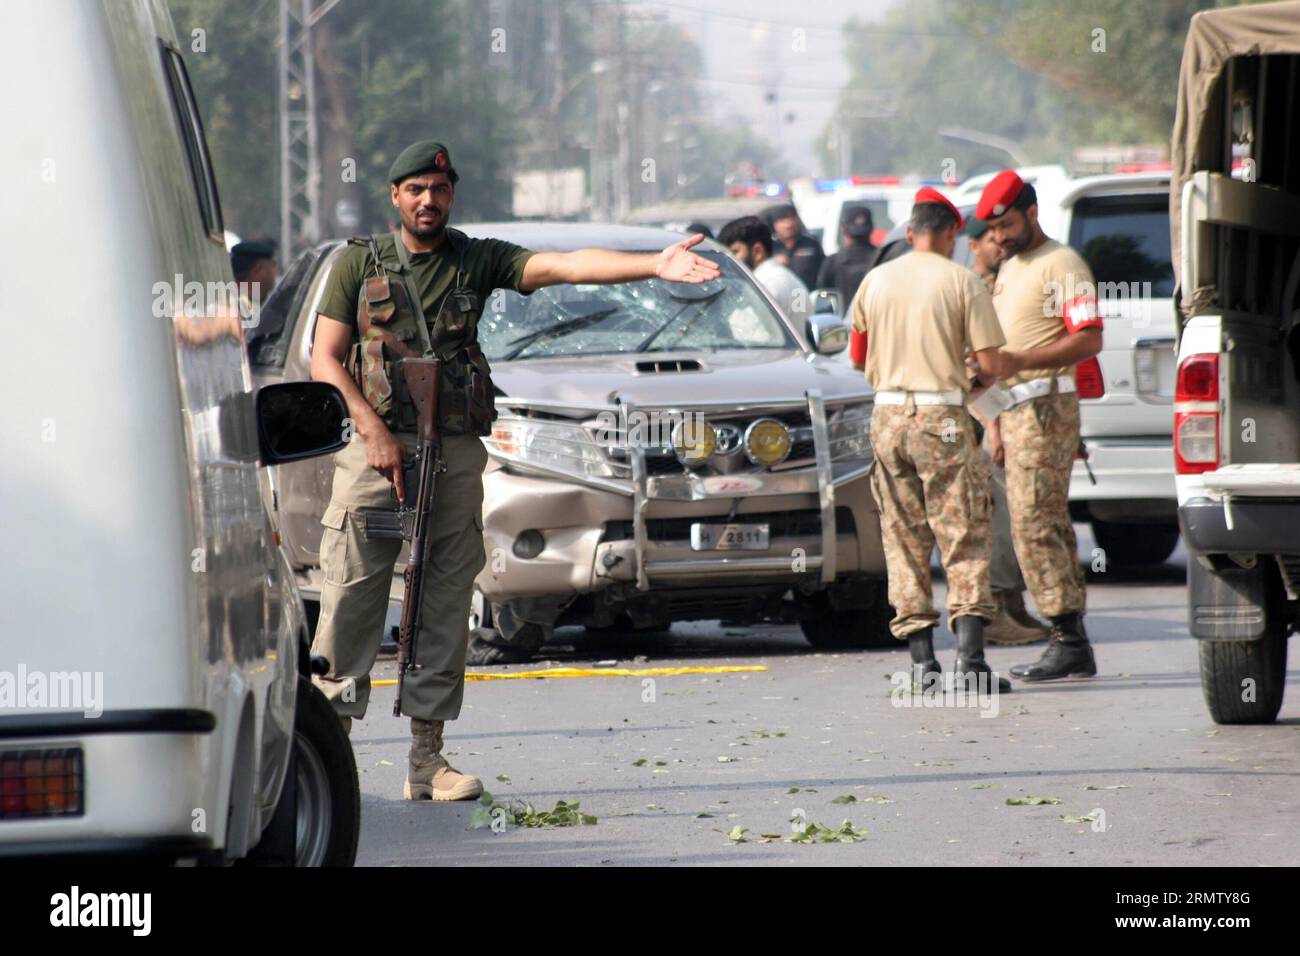 (140923) -- PESHAWAR, Sept. 23, 2014 -- Pakistani soldiers cordon off the blast site in northwest Pakistan s Peshawar on Sept. 23, 2014. At least three people were killed and 13 others were injured when a Paramilitary troops convoy came under attack in Pakistan s northwest Peshawar city on Tuesday morning, officials said. ) PAKISTAN-PESHAWAR-BLAST-SITE AhmadxSidique PUBLICATIONxNOTxINxCHN   Peshawar Sept 23 2014 Pakistani Soldiers Cordon off The Blast Site in Northwest Pakistan S Peshawar ON Sept 23 2014 AT least Three Celebrities Were KILLED and 13 Others Were Injured When a paramilitary Troo Stock Photo